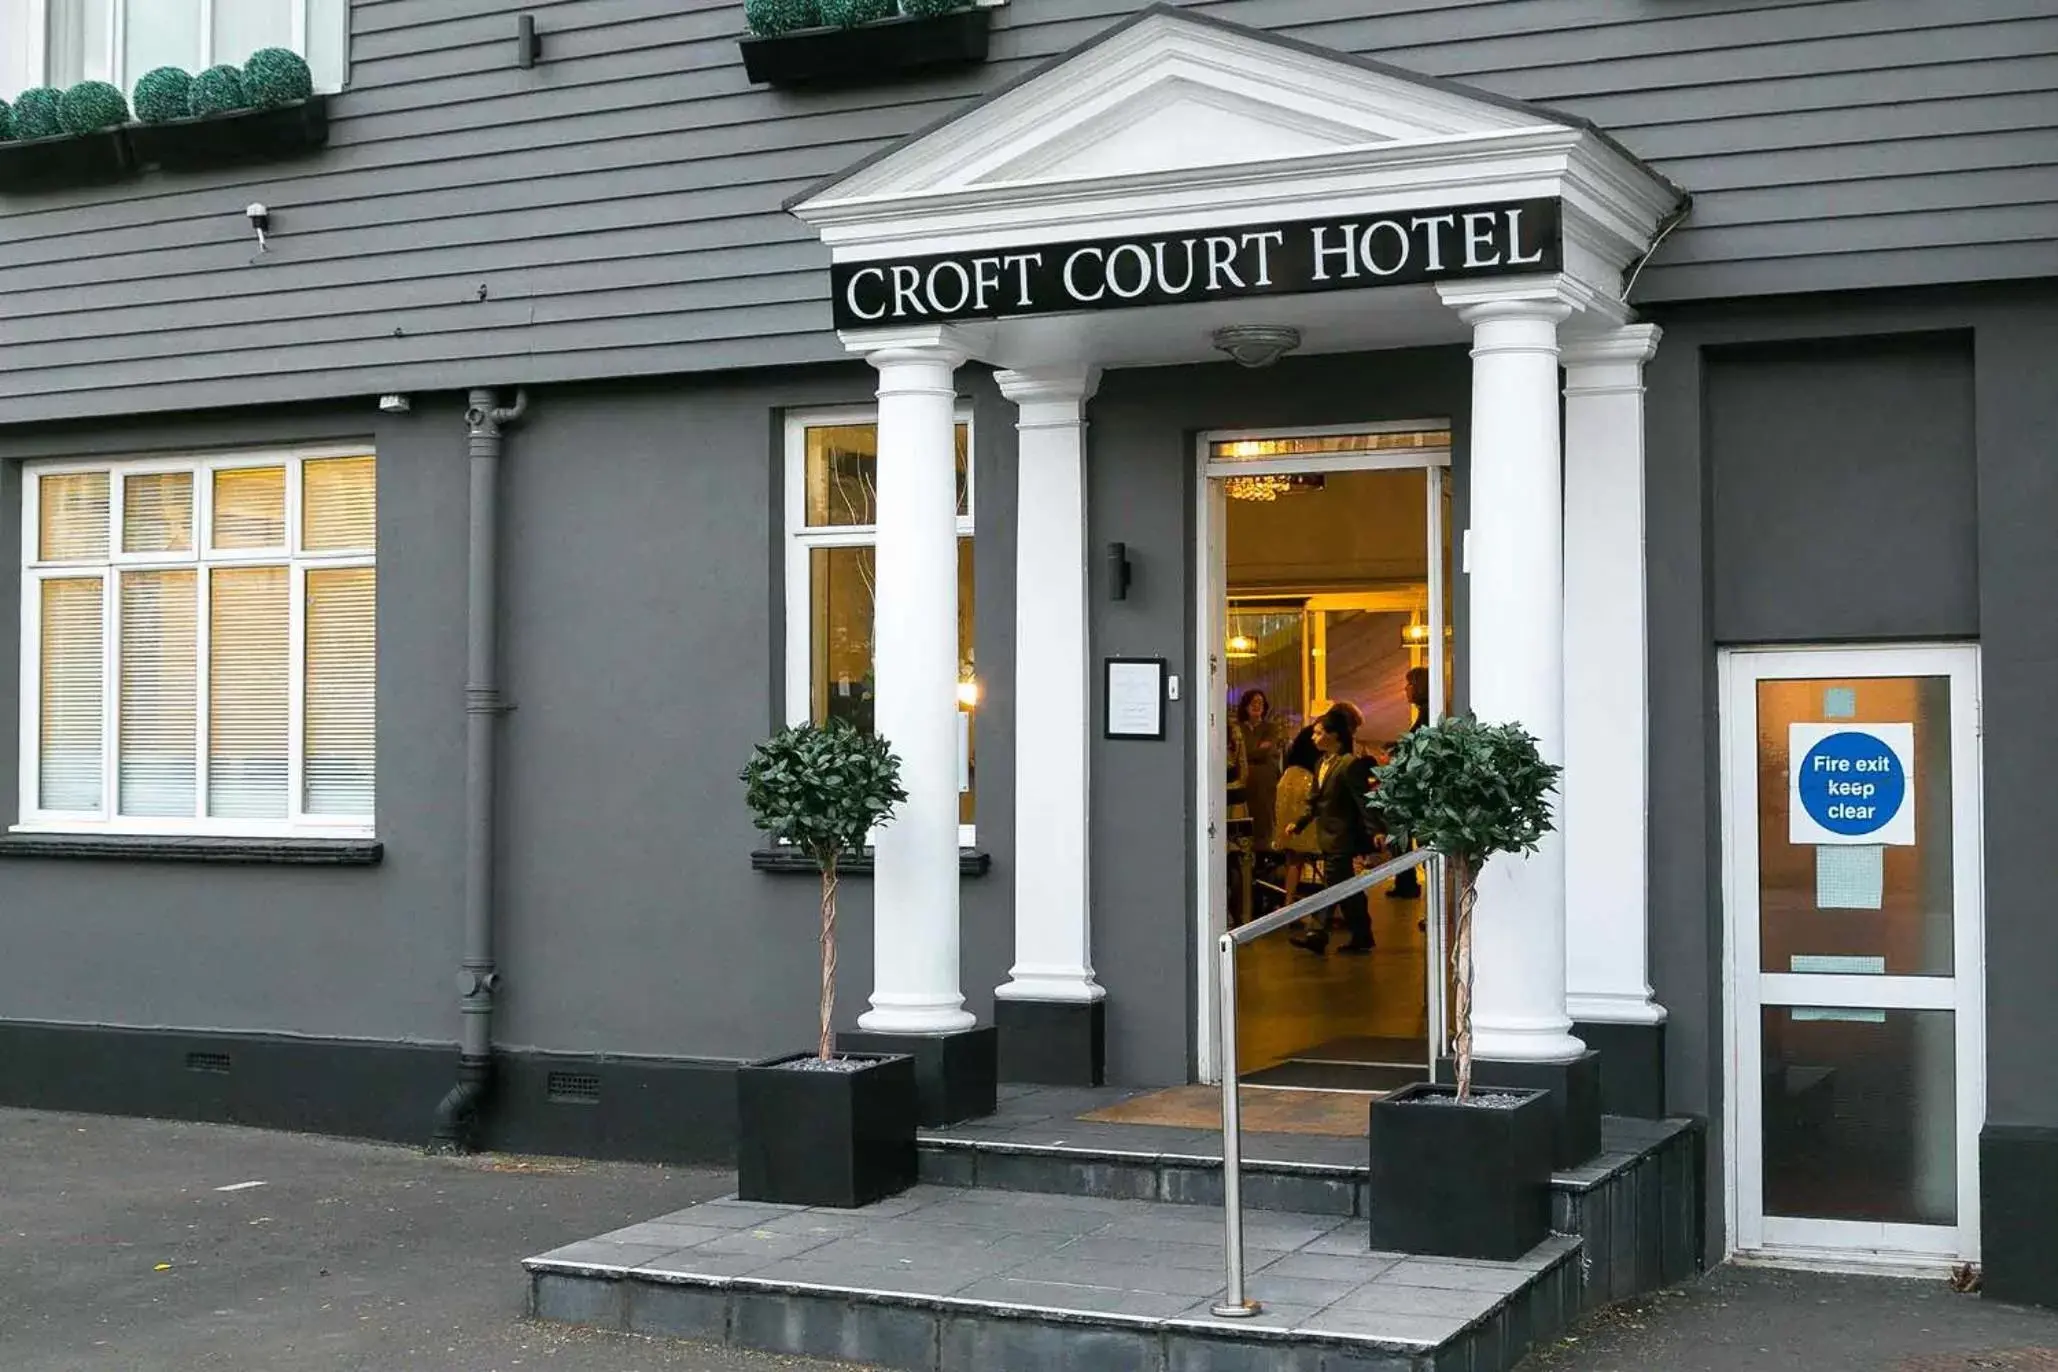 Property building in Croft Court Hotel